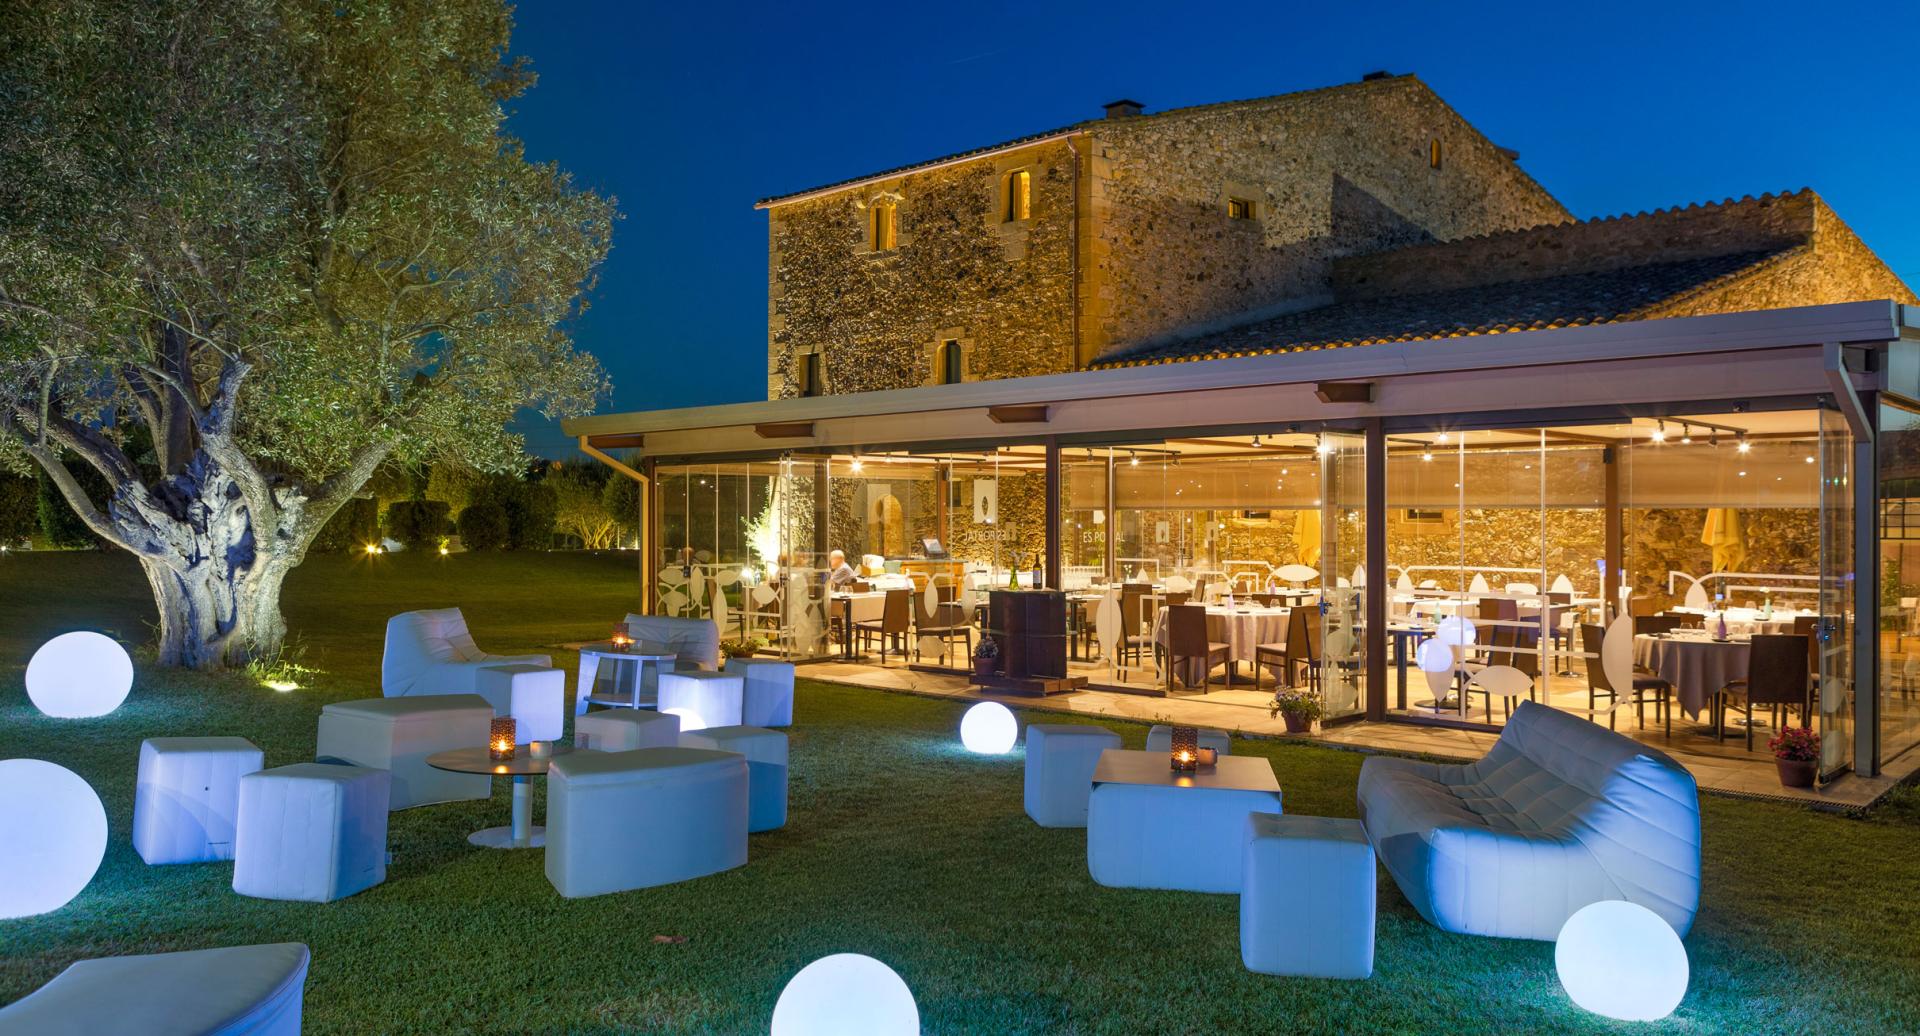 Your boutique hotel on the Costa Brava